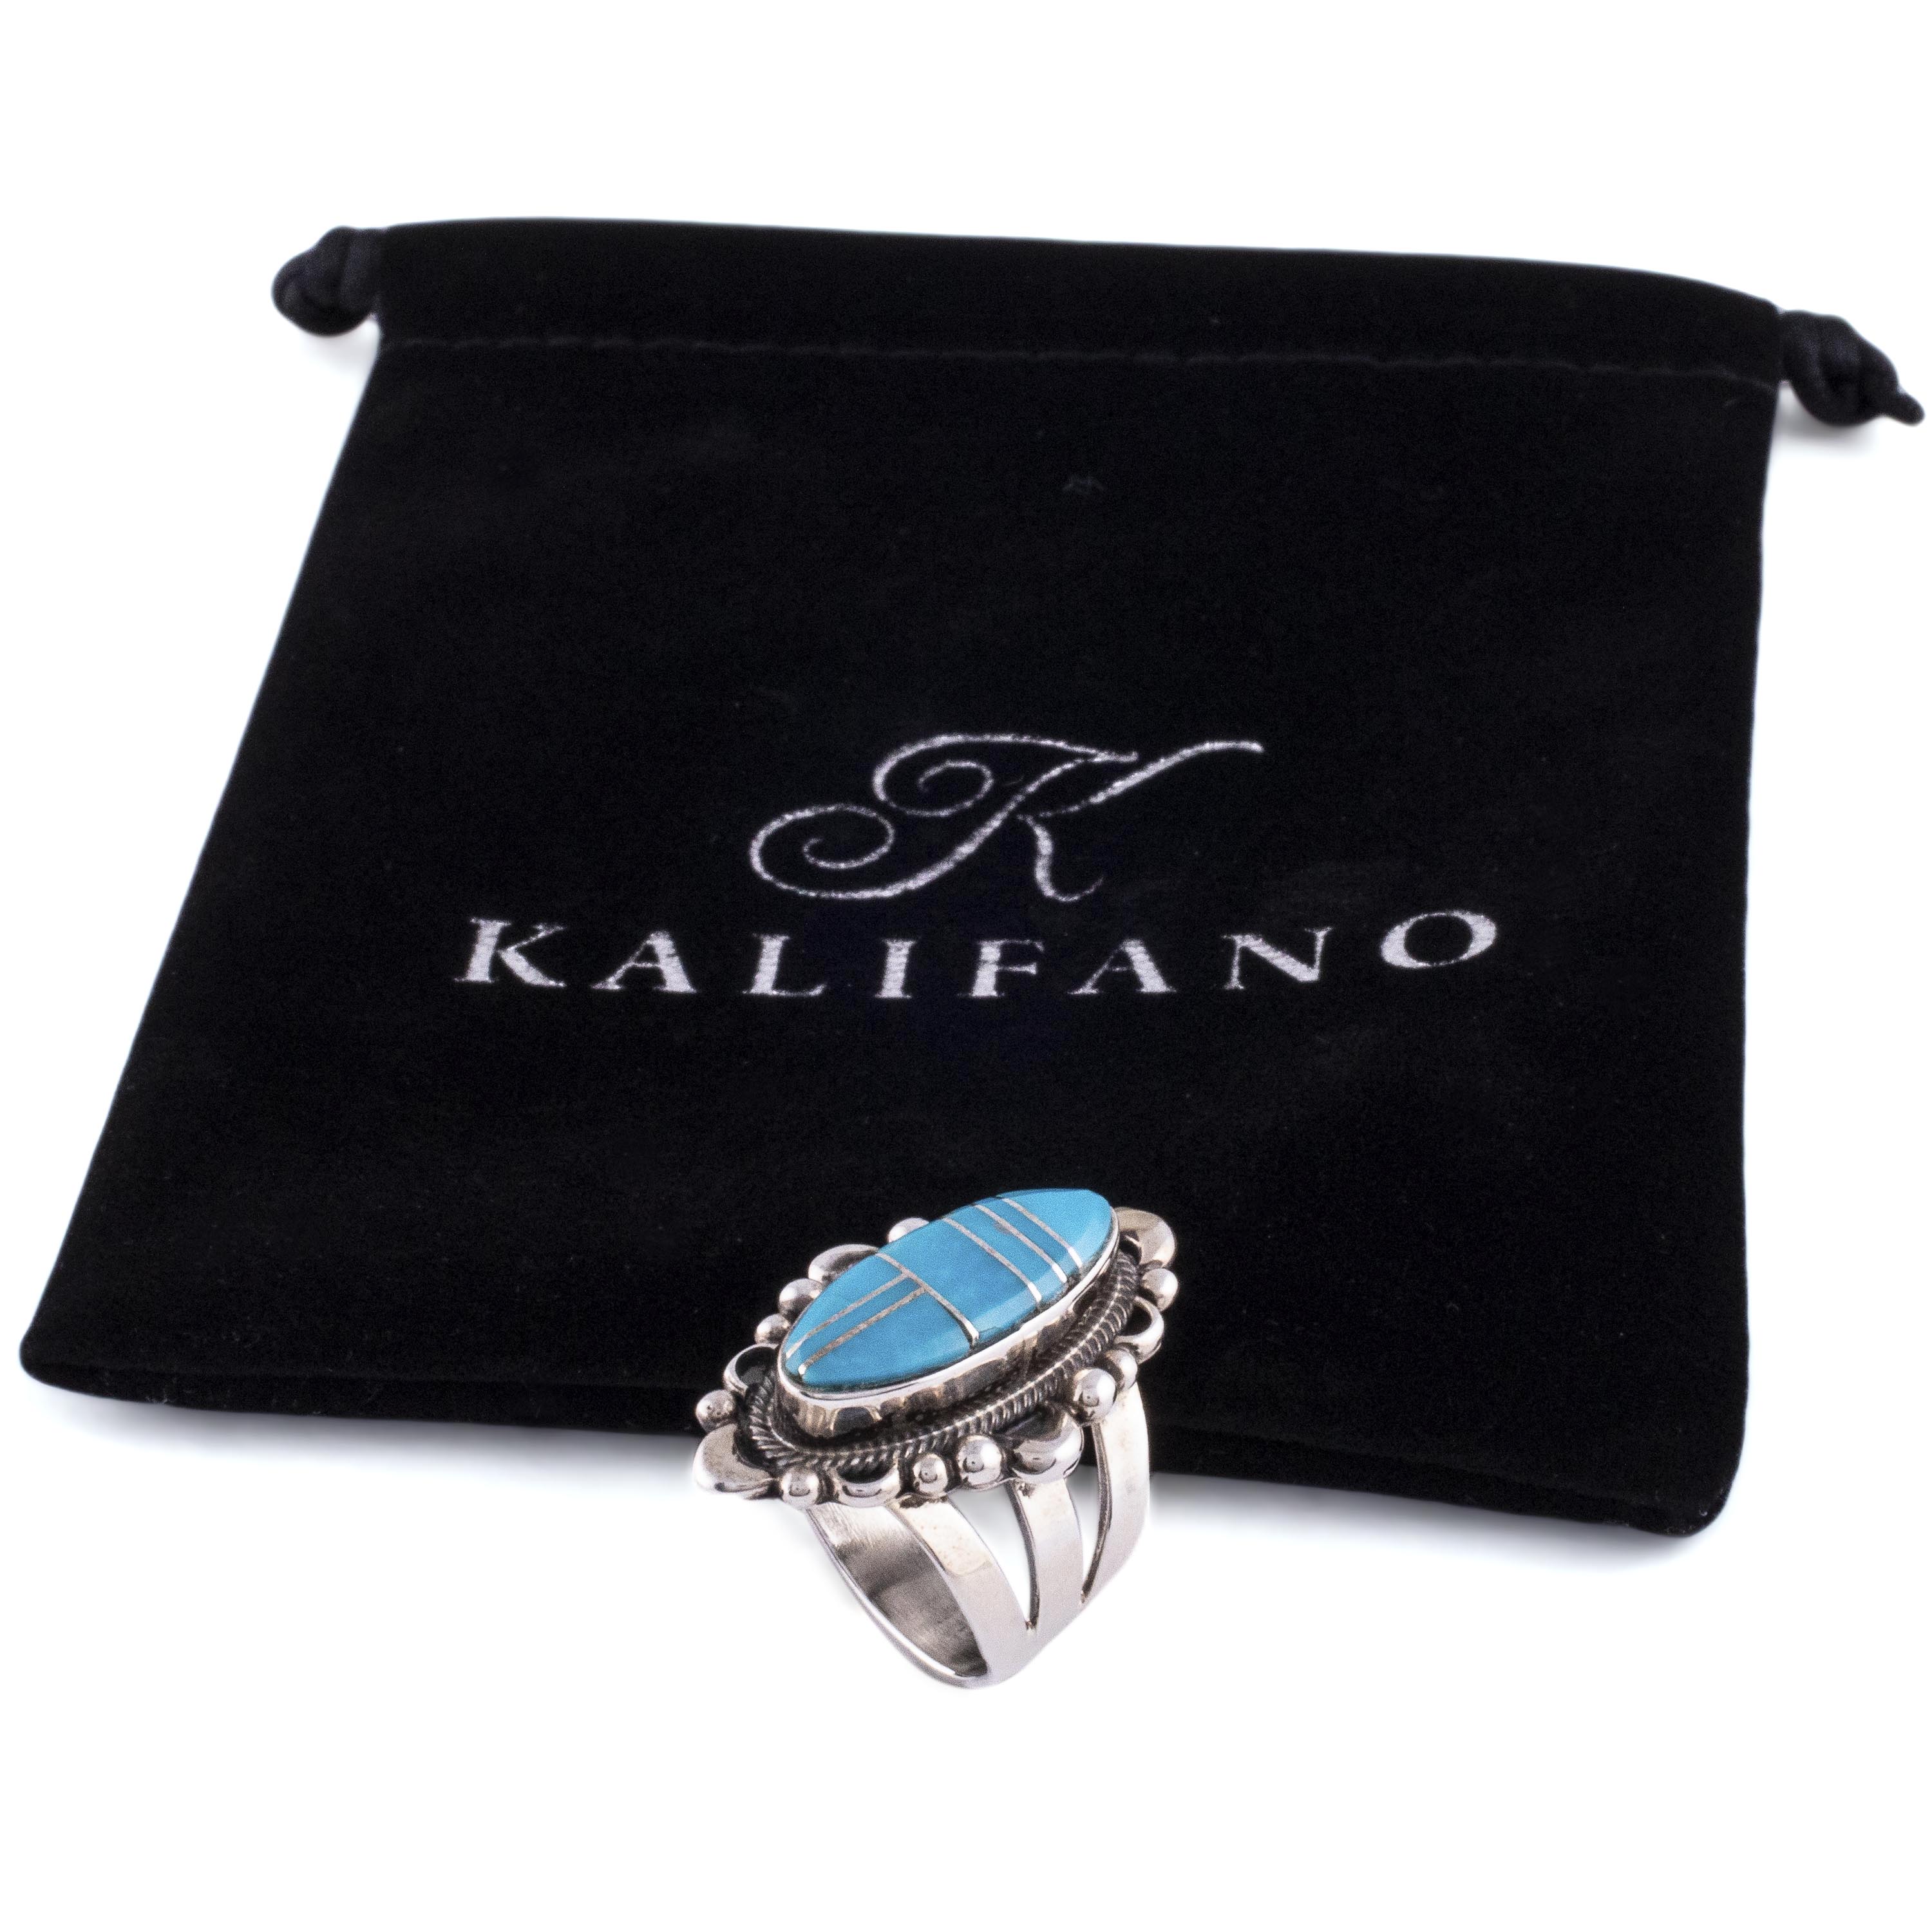 Kalifano Native American Jewelry 6 Danny Clark Kingman Turquoise USA Native American Made 925 Sterling Silver Ring NAR400.100.6